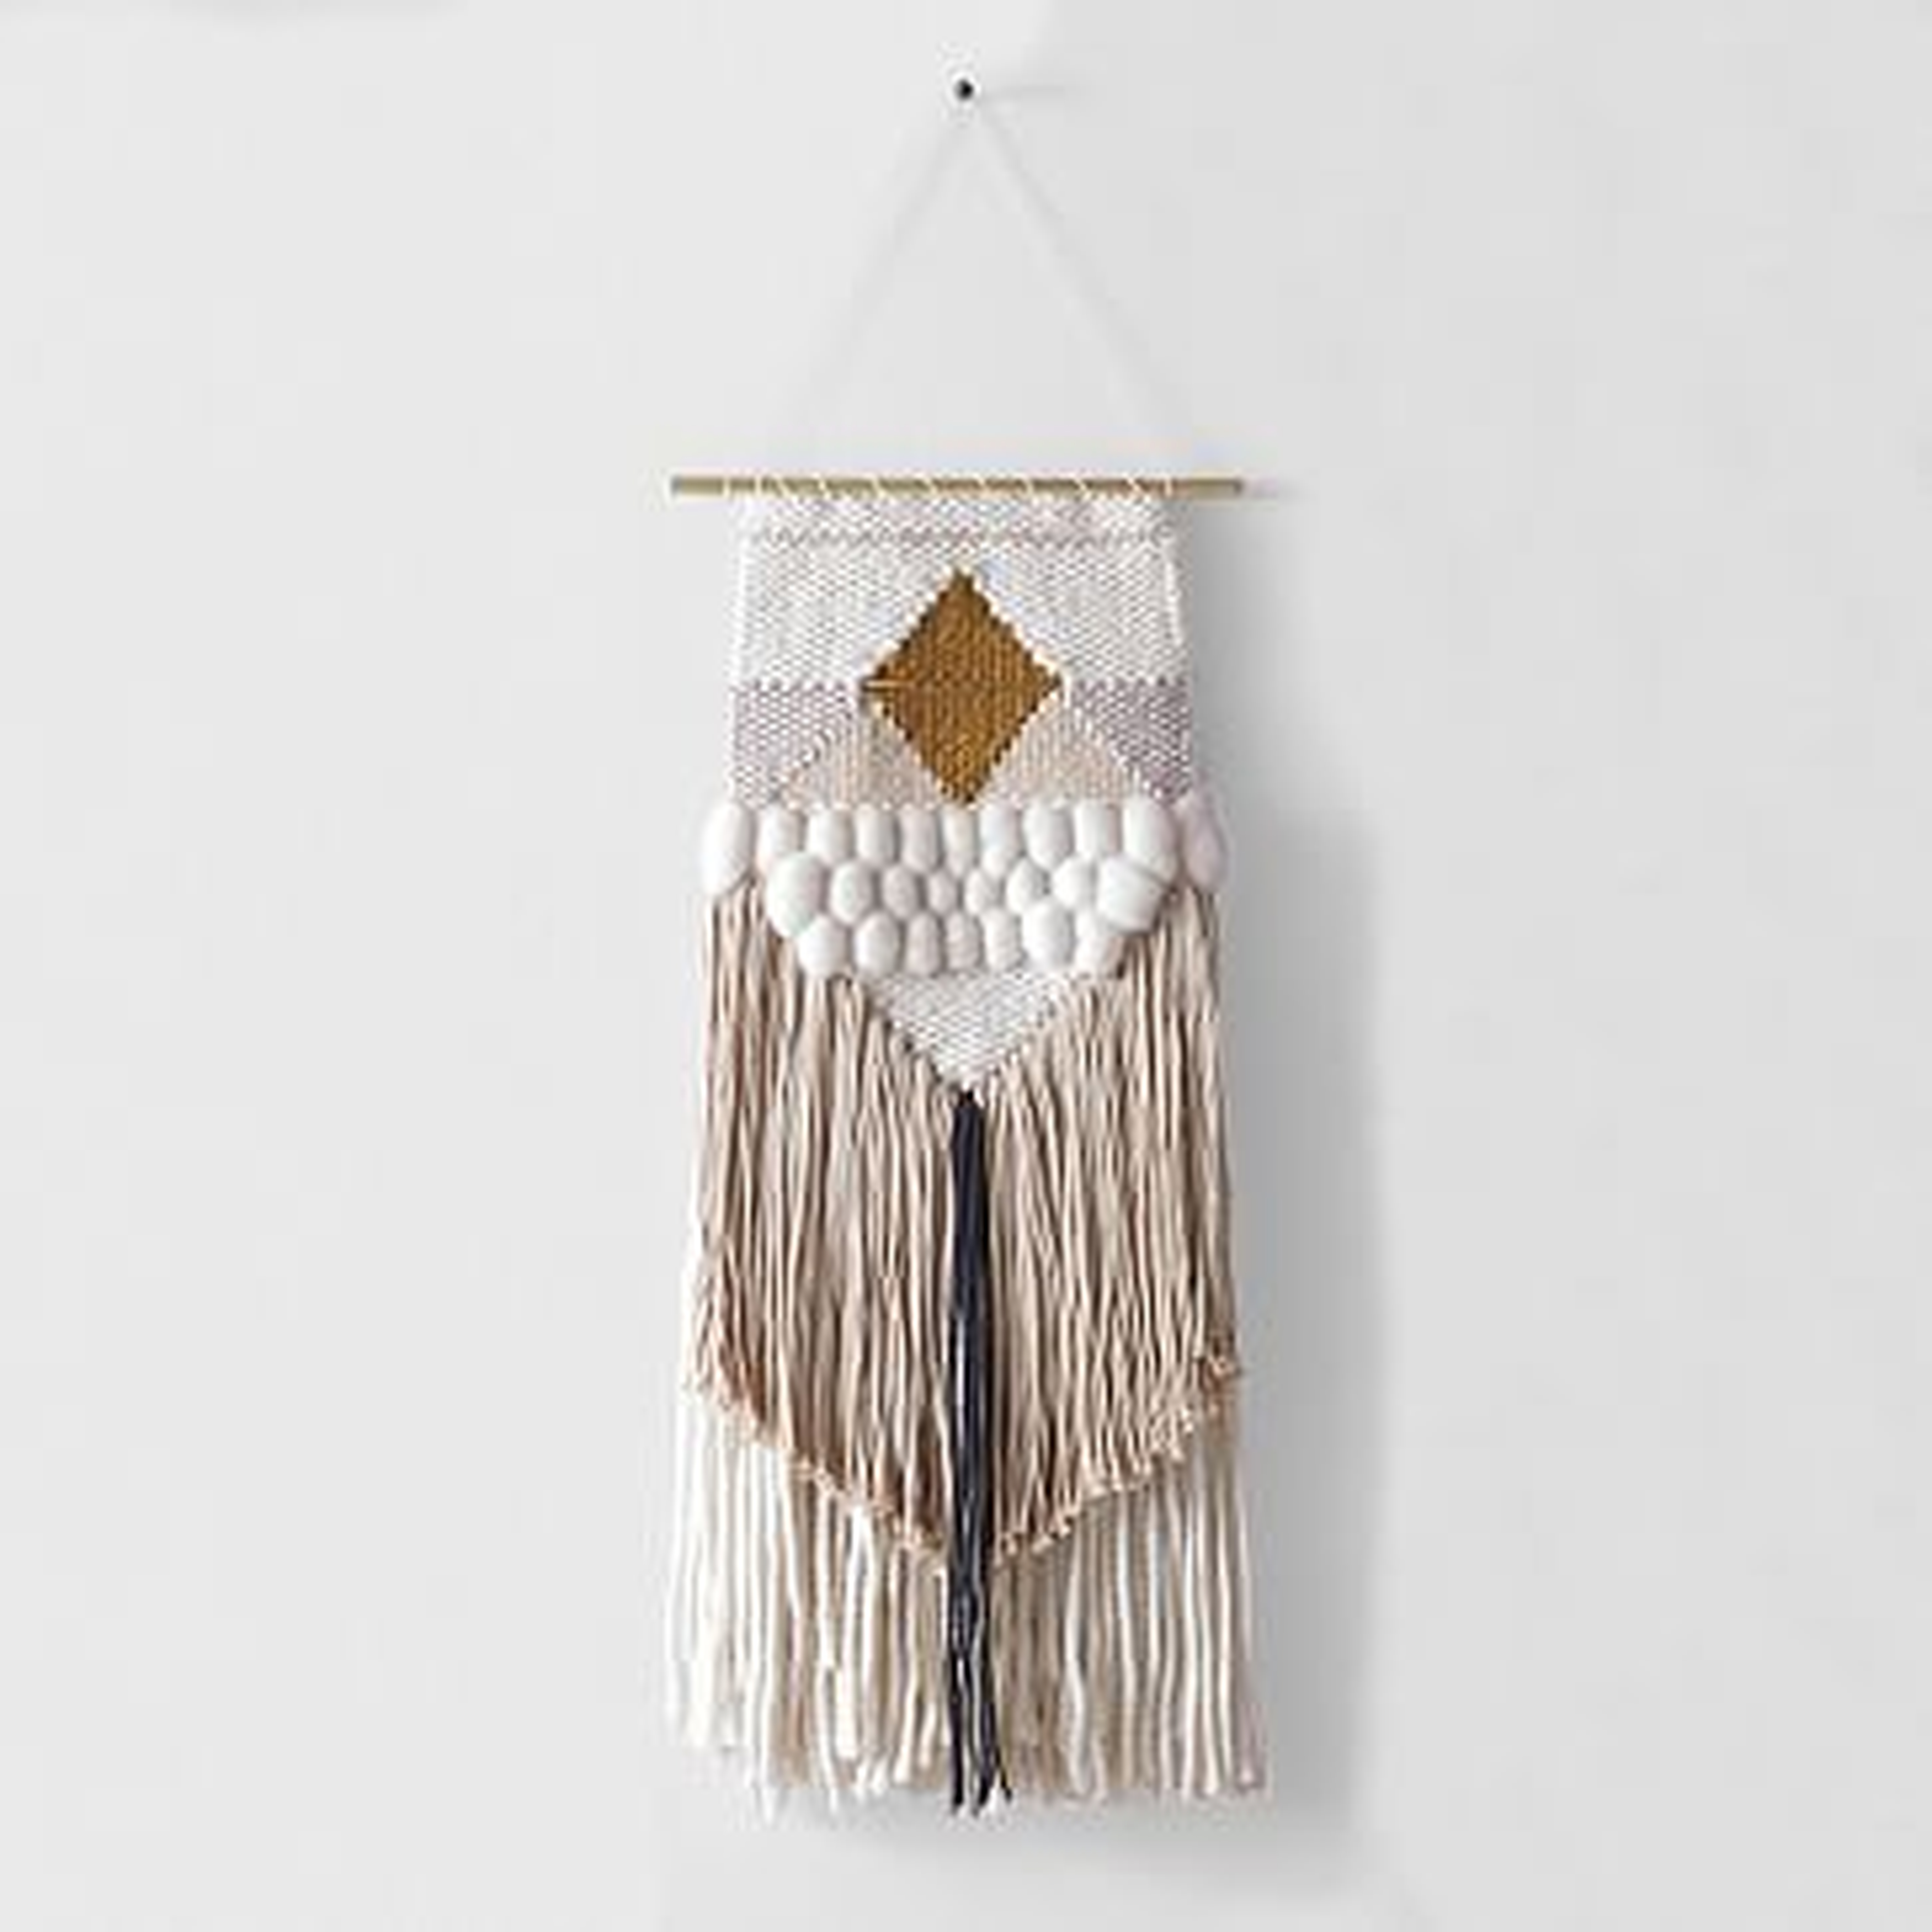 Sun Woven Wall Hanging, Large, Natural - West Elm